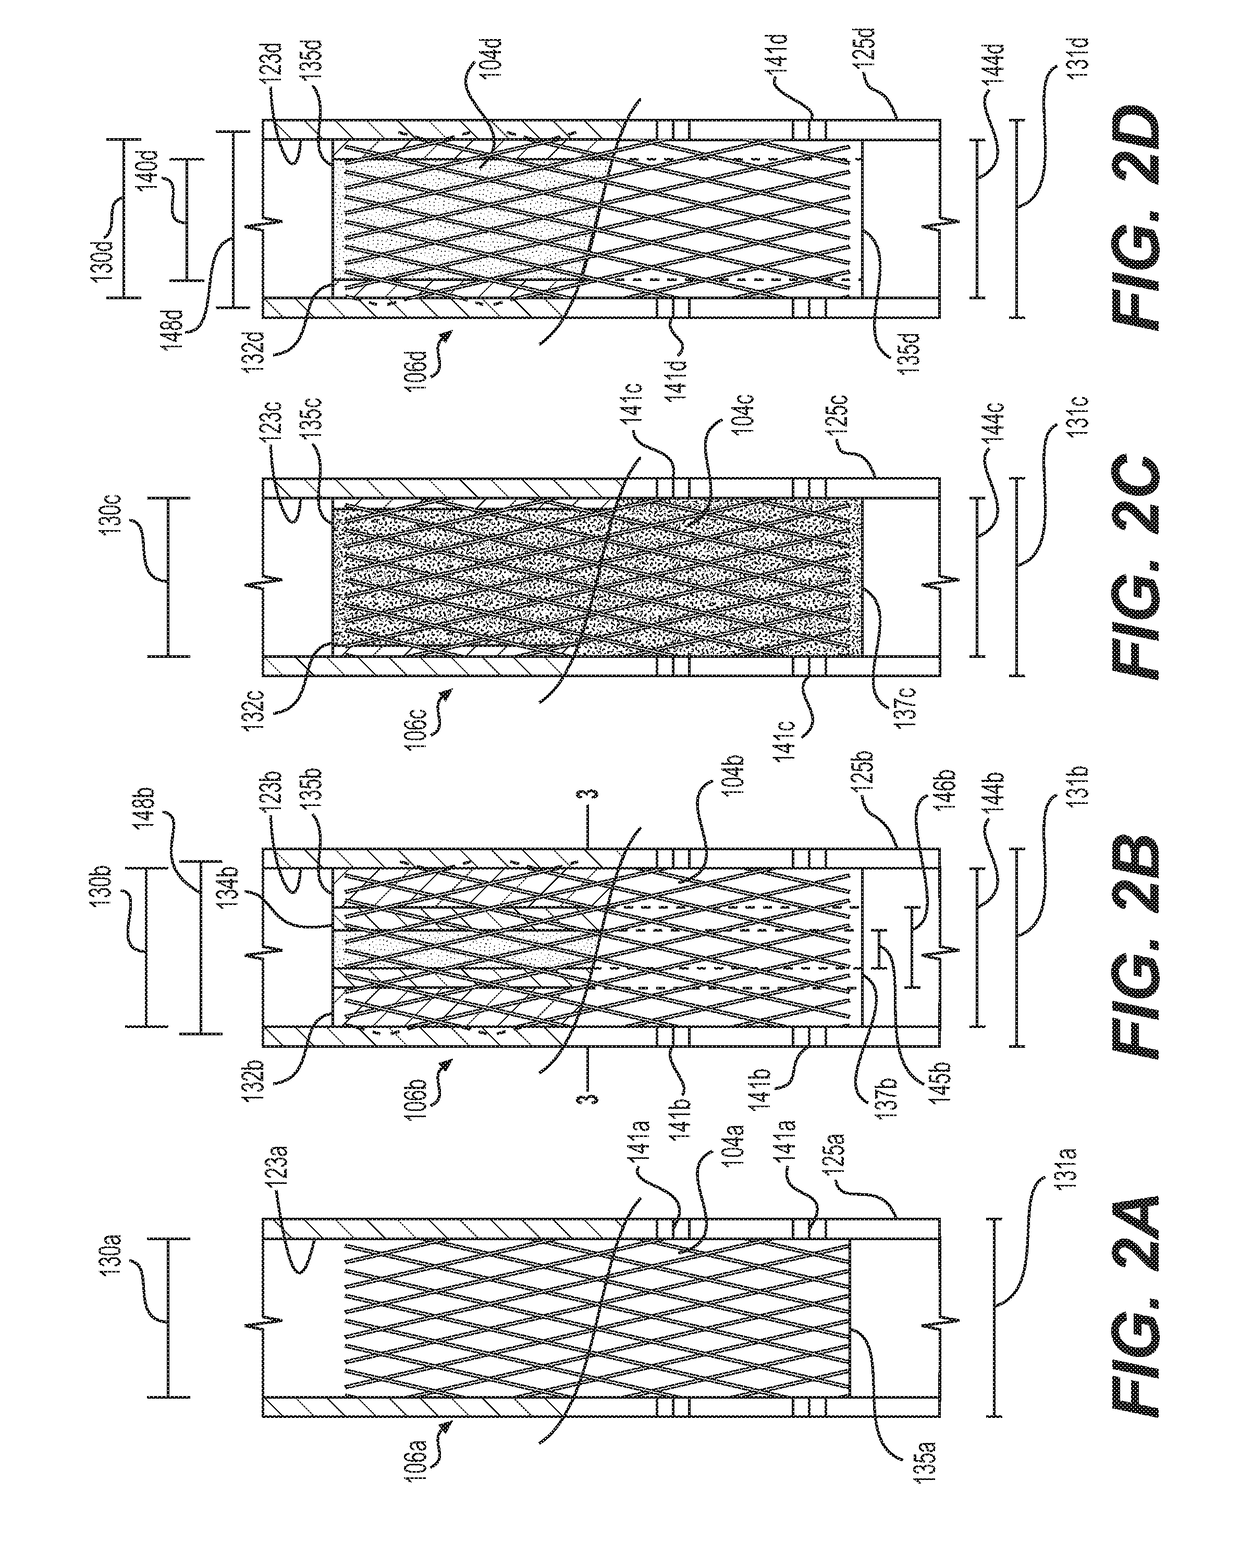 Fatigue to fracture medical device testing method and system